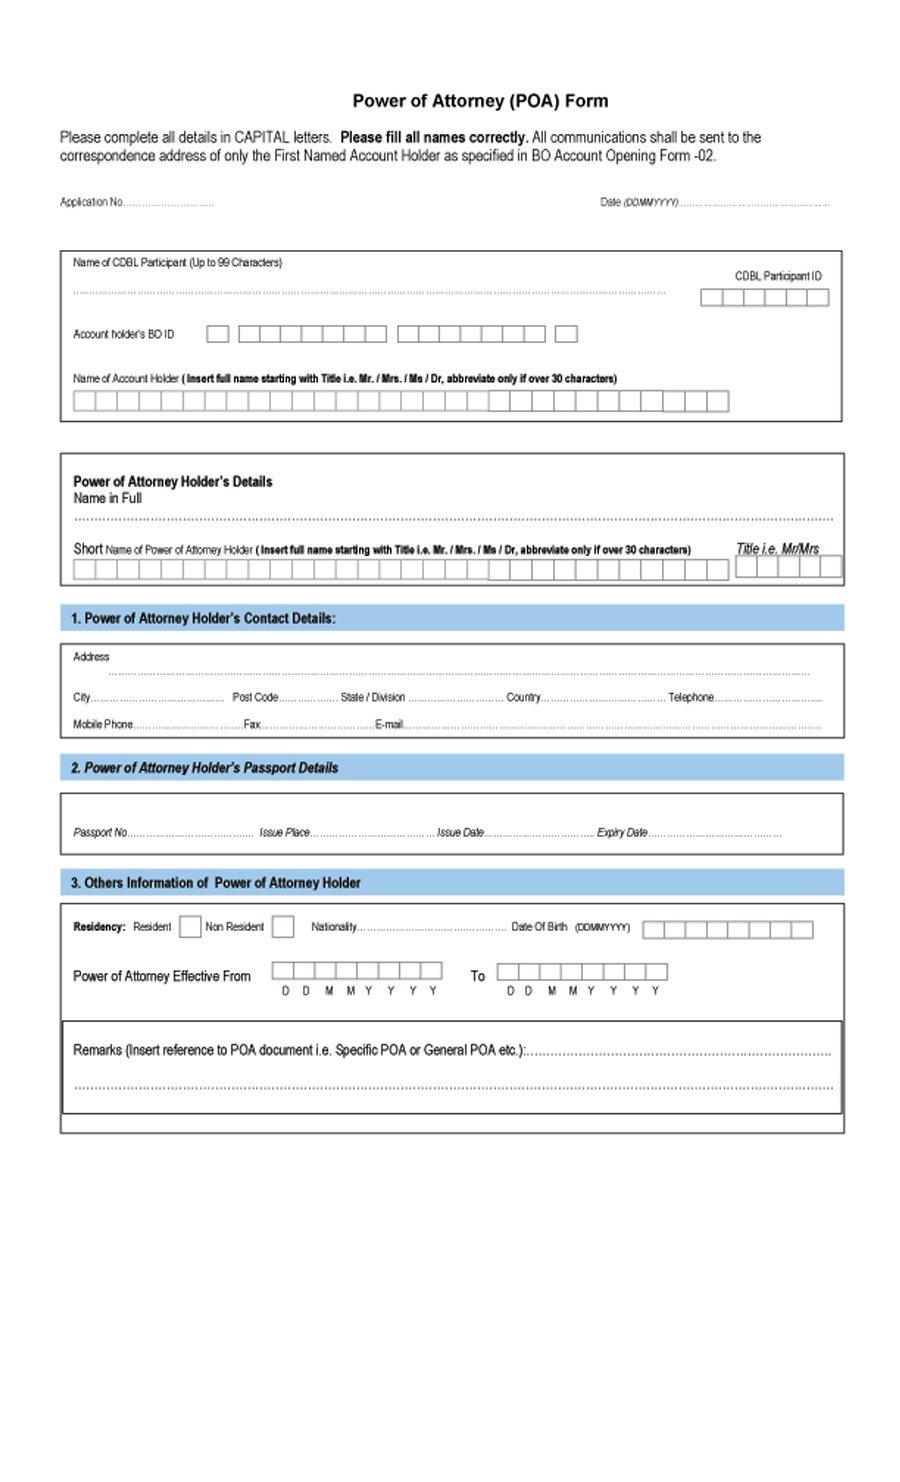 50 Free Power Of Attorney Forms &amp; Templates (Durable, Medical,general) - Free Printable Power Of Attorney Forms Online